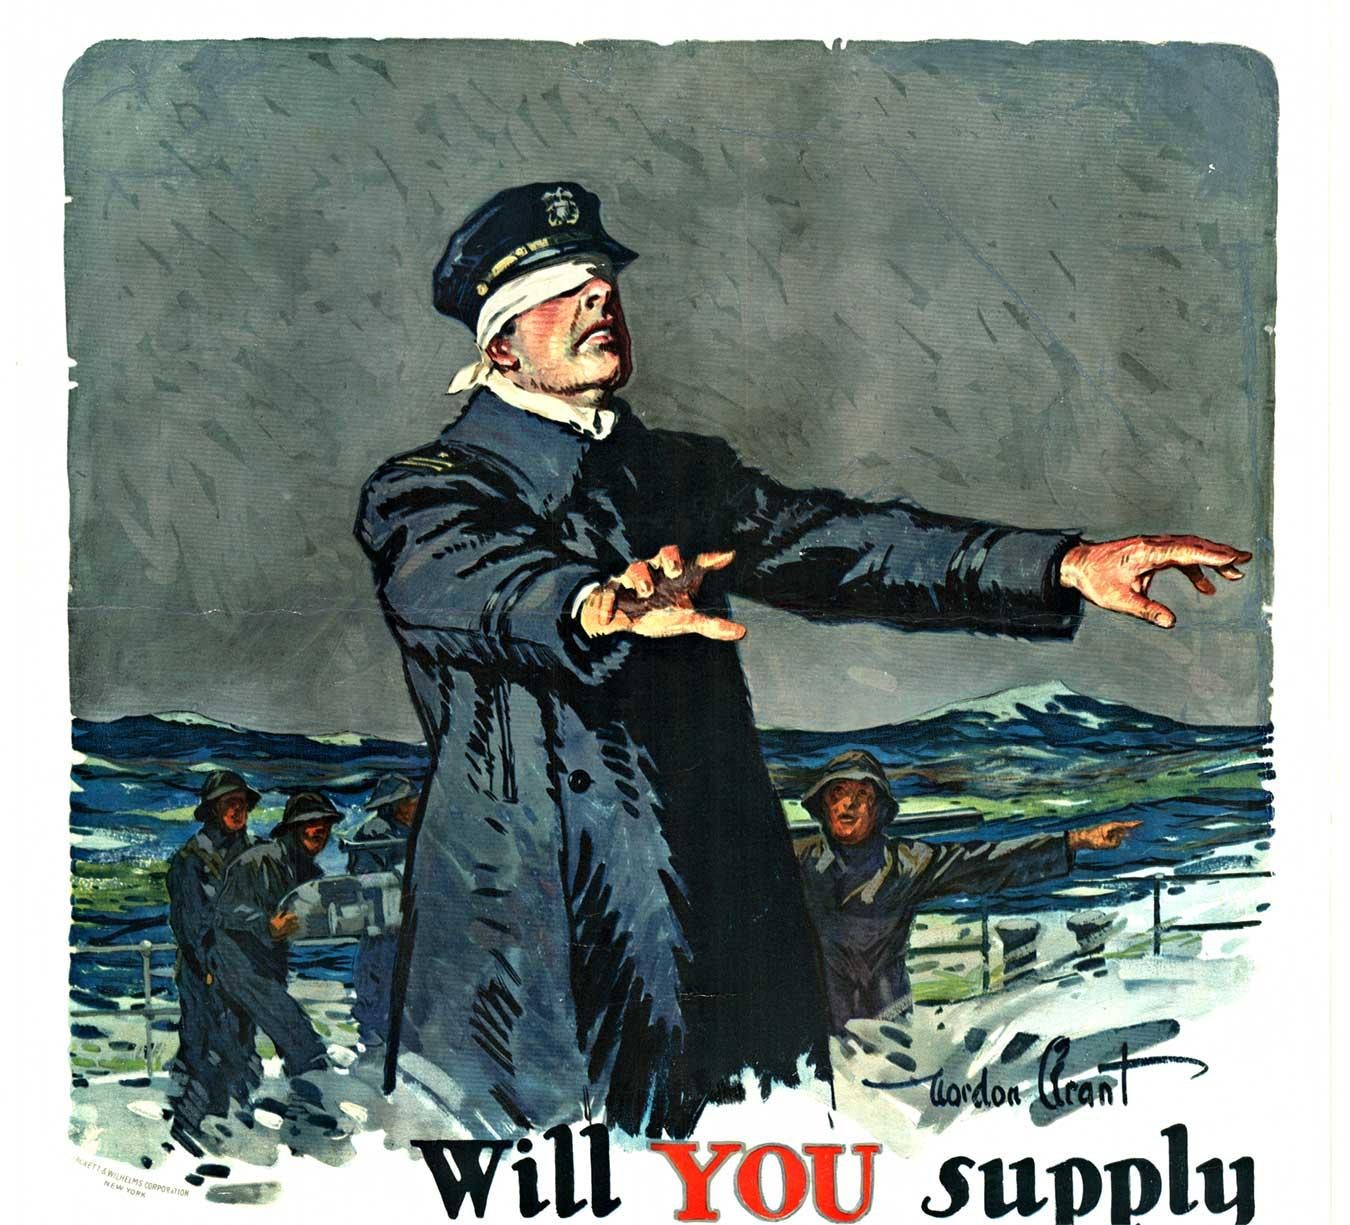 Original 'Will You Supply Eyes for the Navy?' vintage American military poster - Print by Gordon Grant